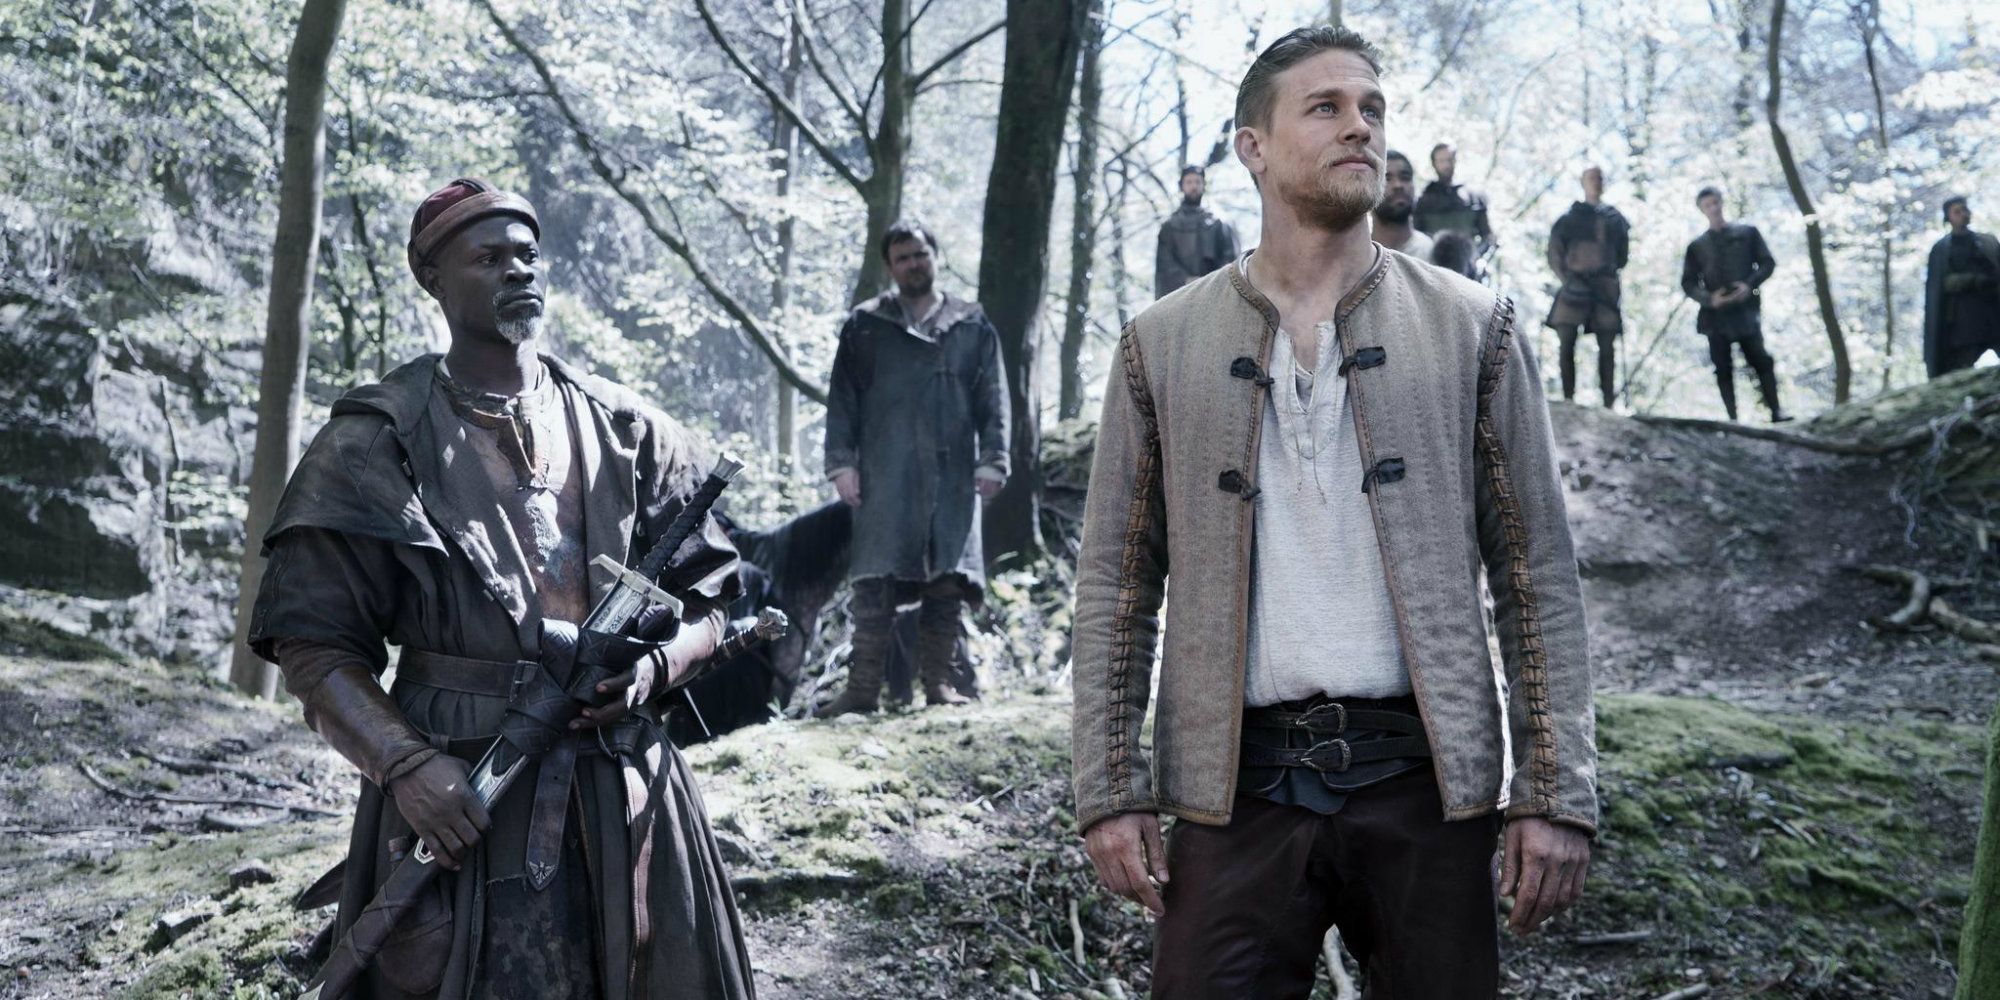 Djimon Hounsou and Charlie Hunnam in King Arthur Legend of the Sword